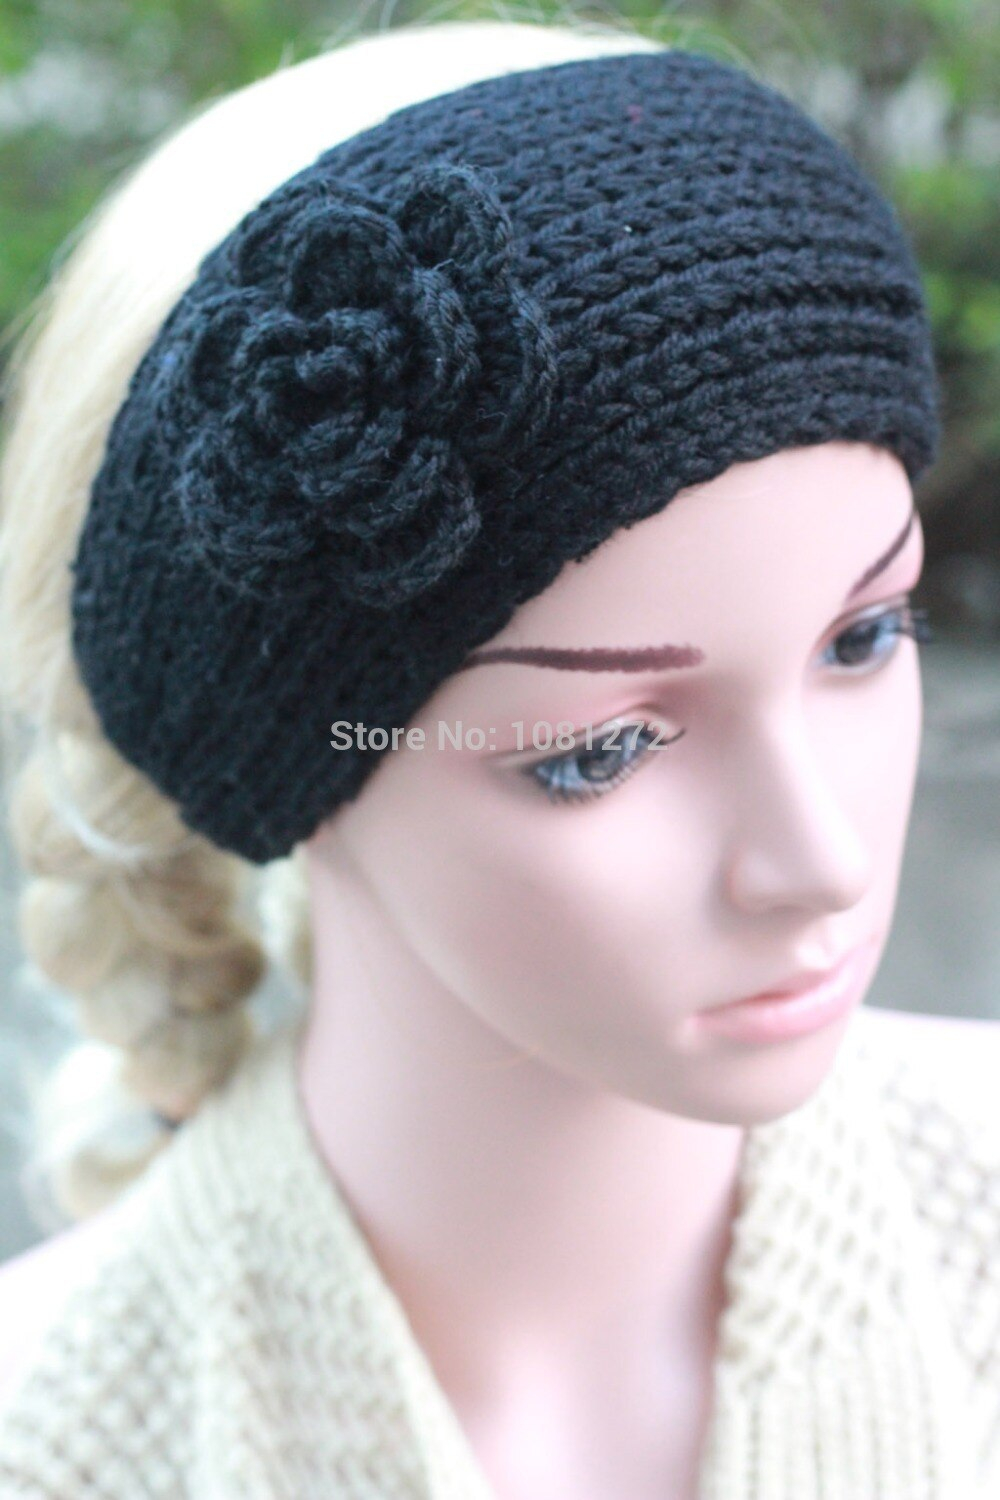 Knitted Headband With Flower Pattern Us 529 Black Knit Headbandsmall Flower Headbandearwarmerhair Accessorieshead Wrapheadband Patternfall And Winter Hair Accessory In Womens